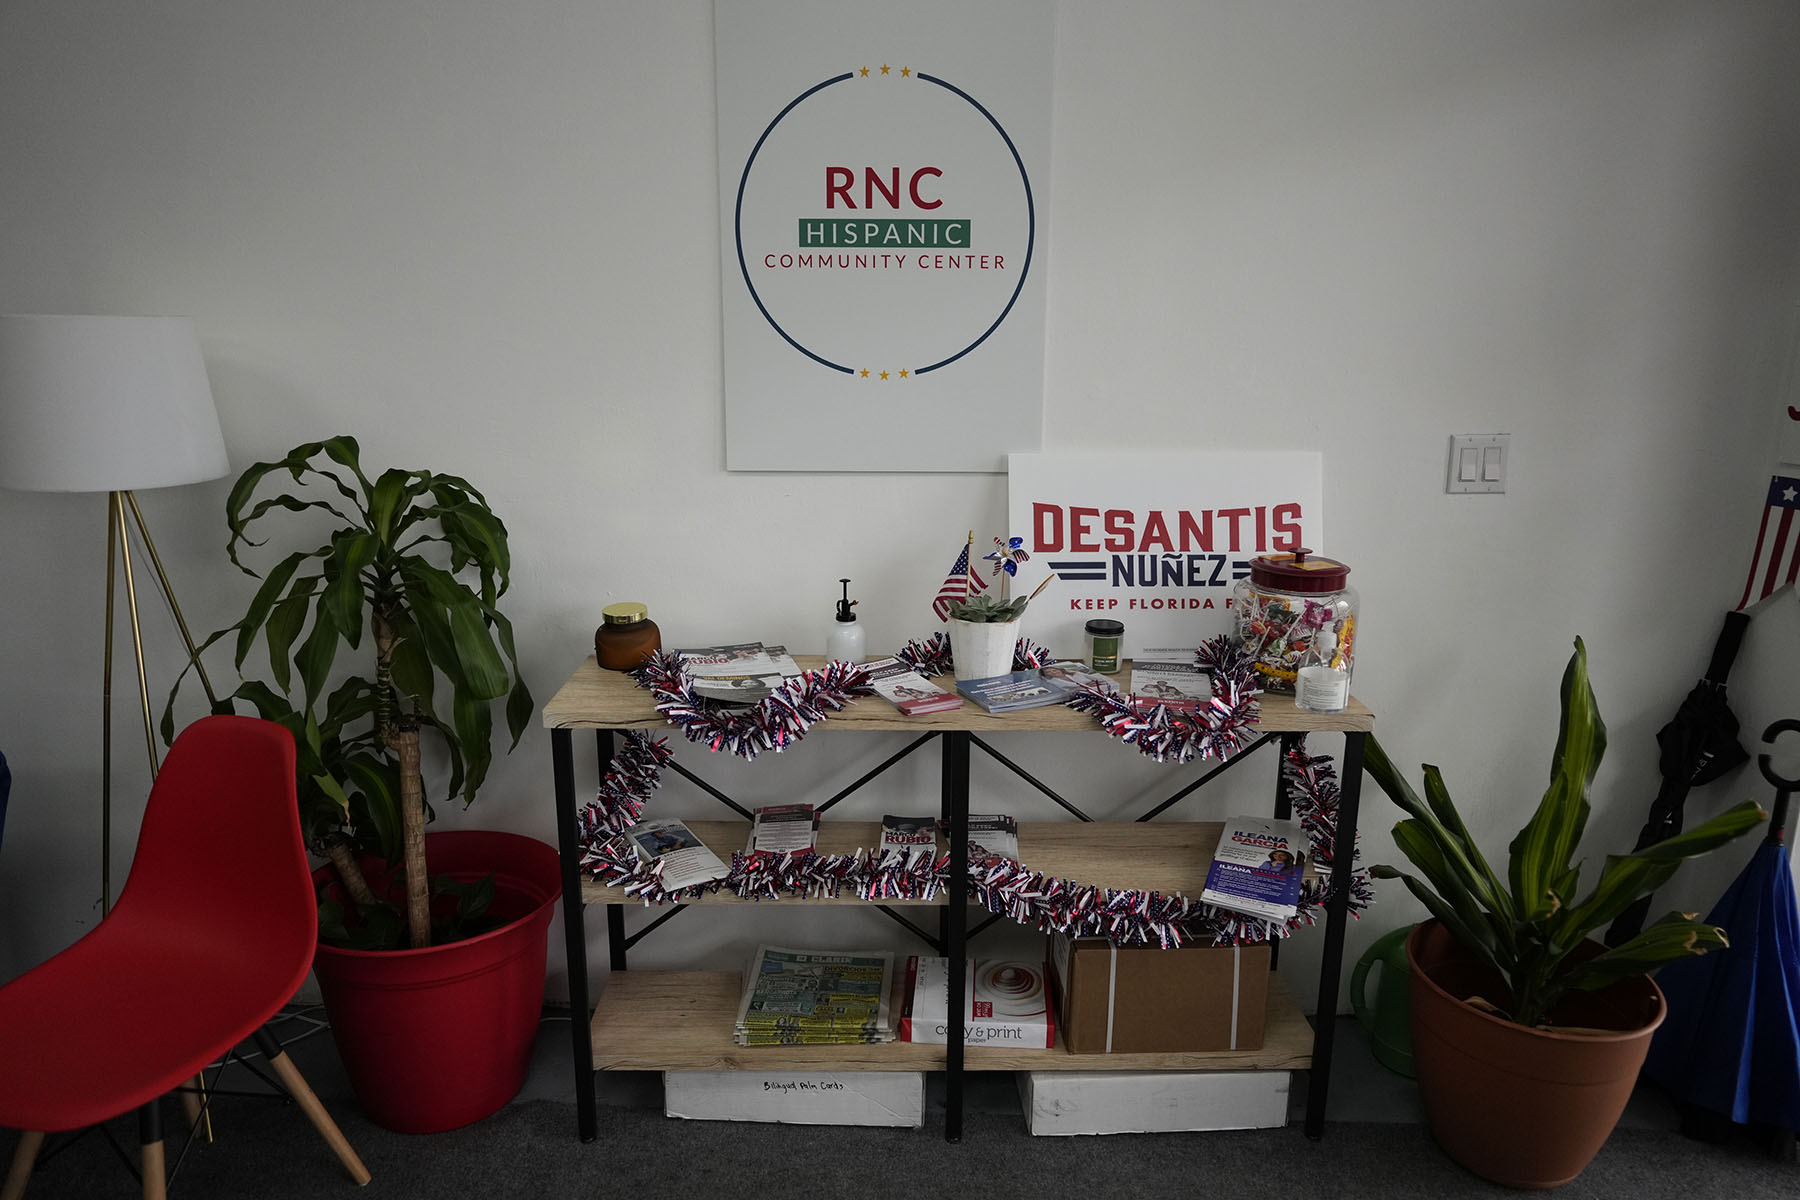 Campaign materials sit on a table during a Get Out the Vote event for Florida Republican candidates.